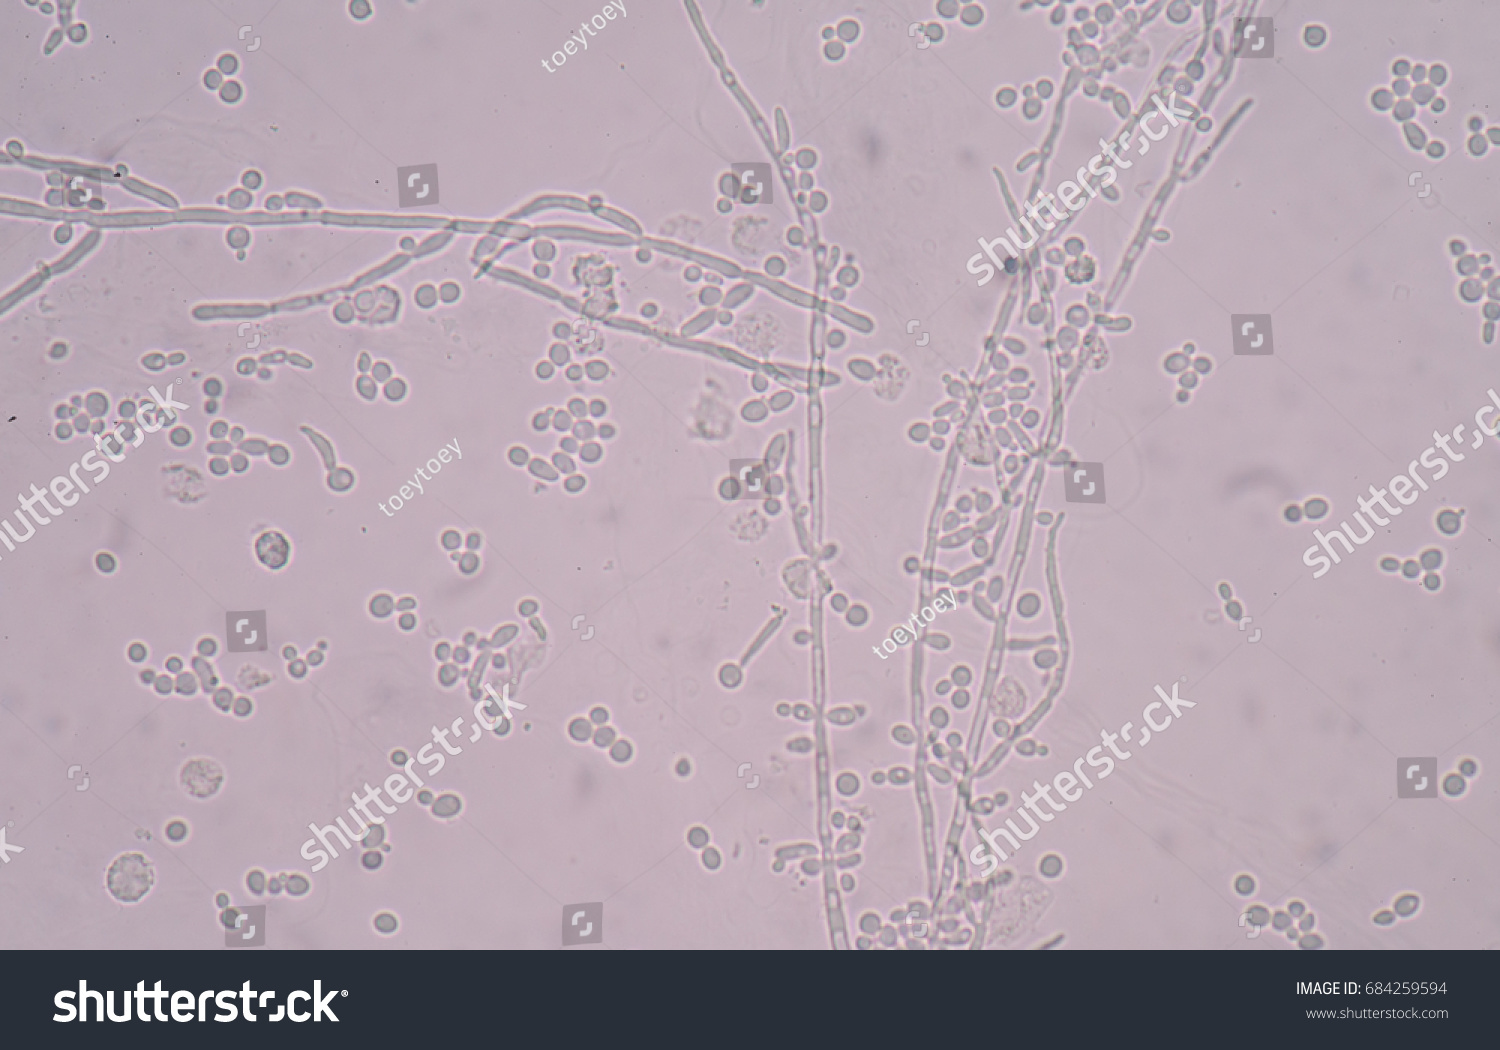 Budding Yeast Cell Structure Fine Microscope Stock Photo 684259594 ...